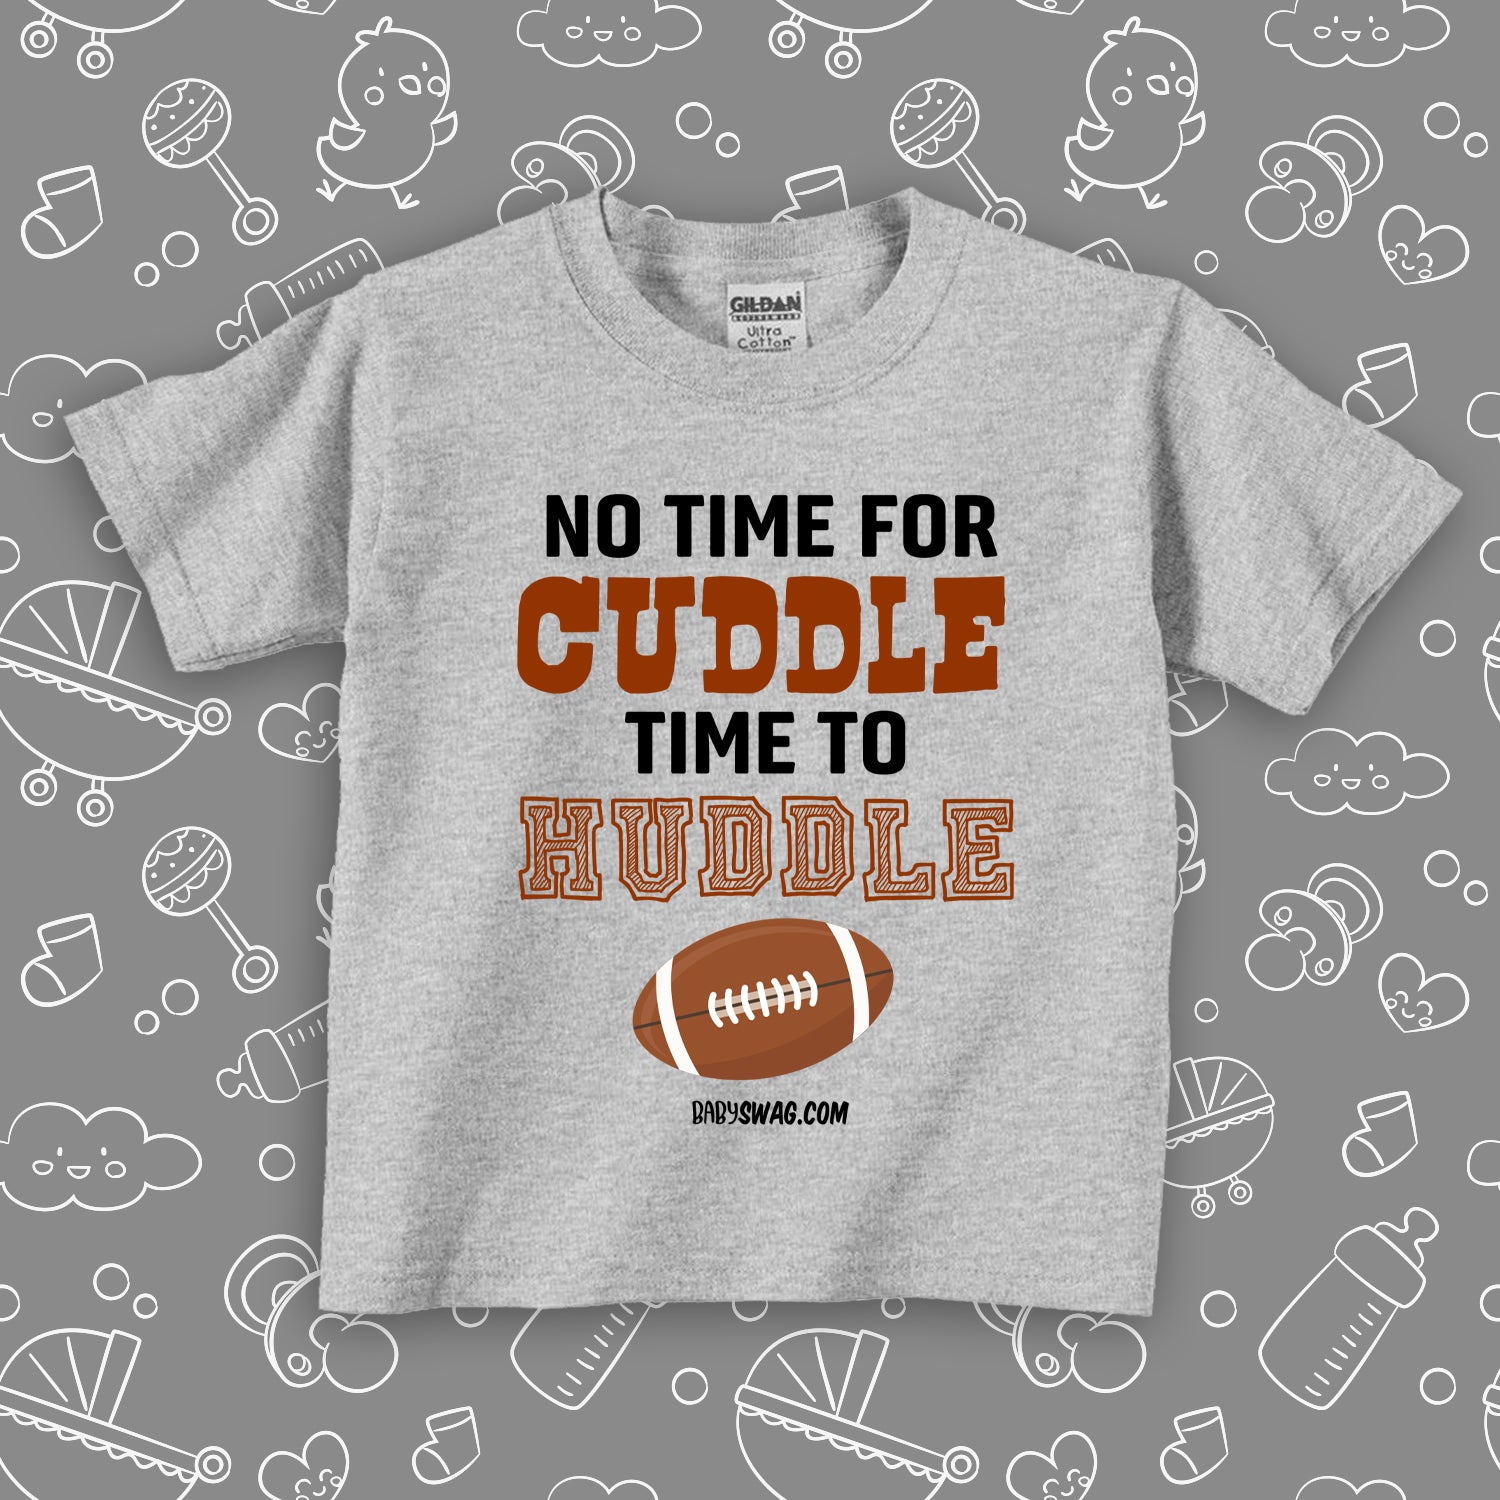 The "No Time For Cuddle Time To Huddle" toddler boy graphic tee in grey. 